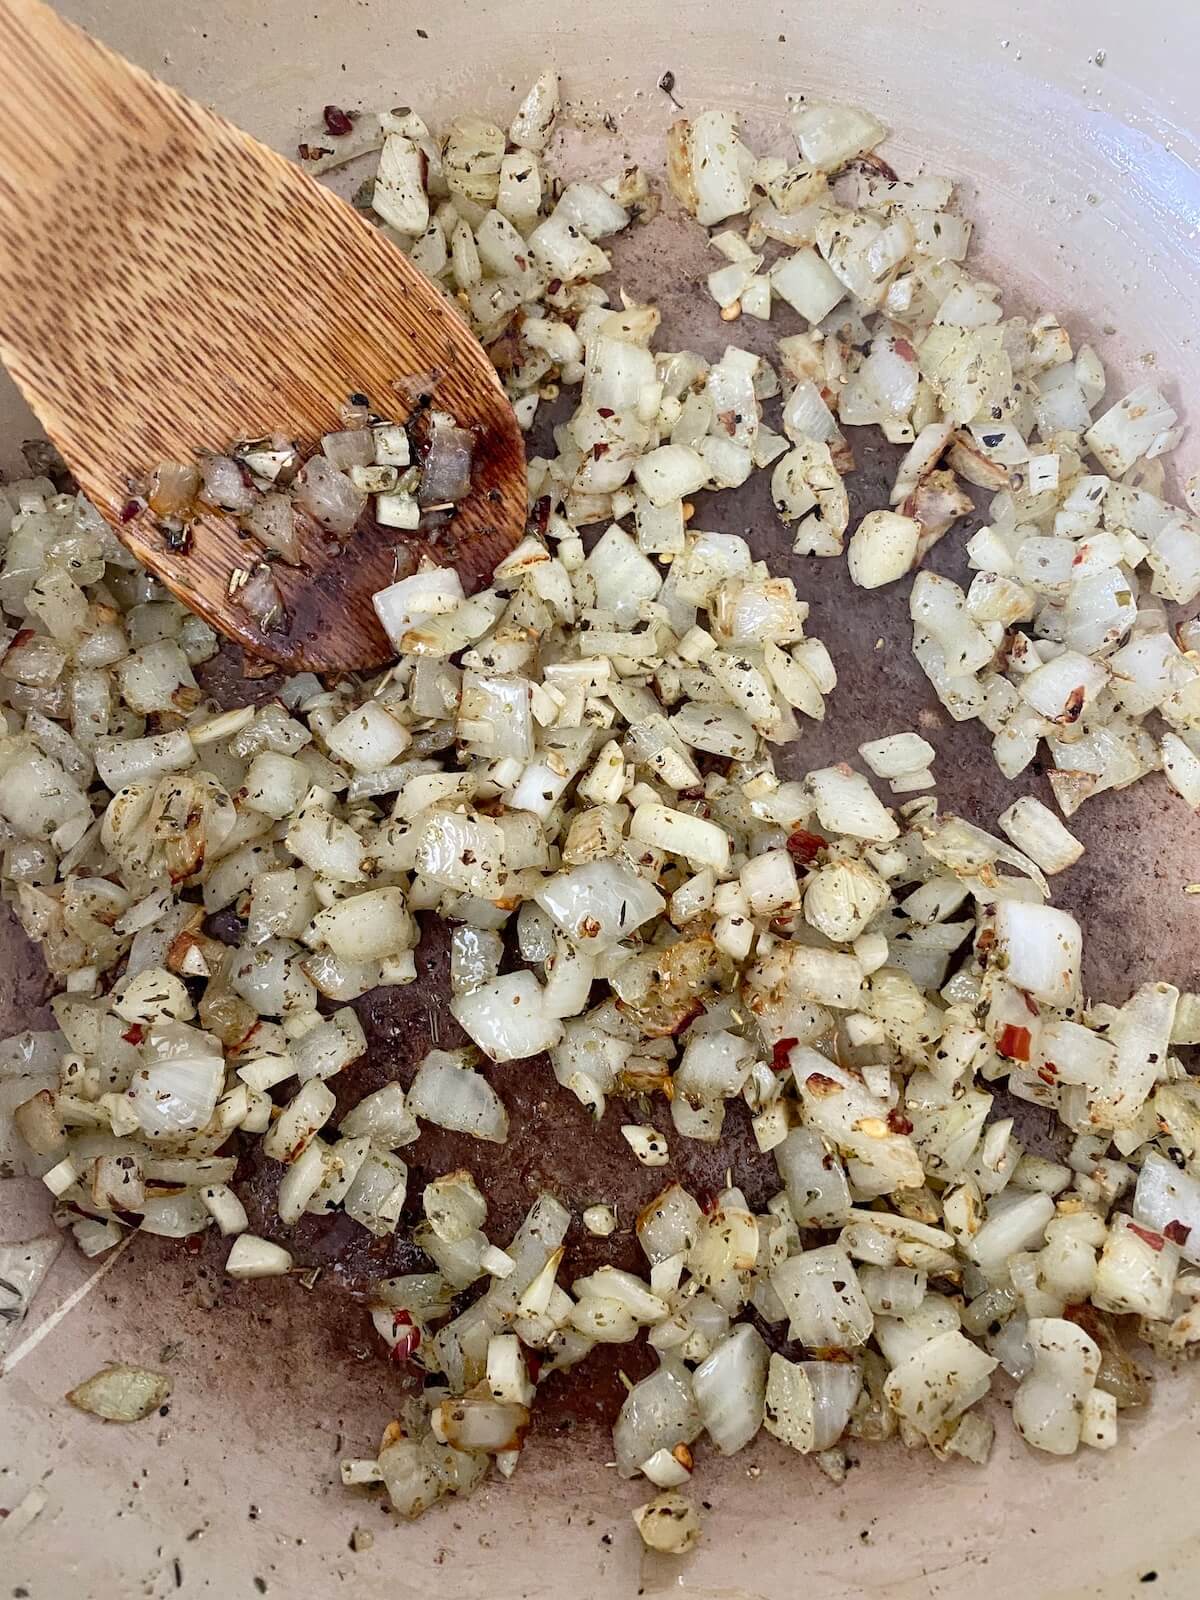 Onion, garlic, and seasonings being sautéed in a Dutch oven. There is a wooden spoon inside the pot, stirring the aromatics.